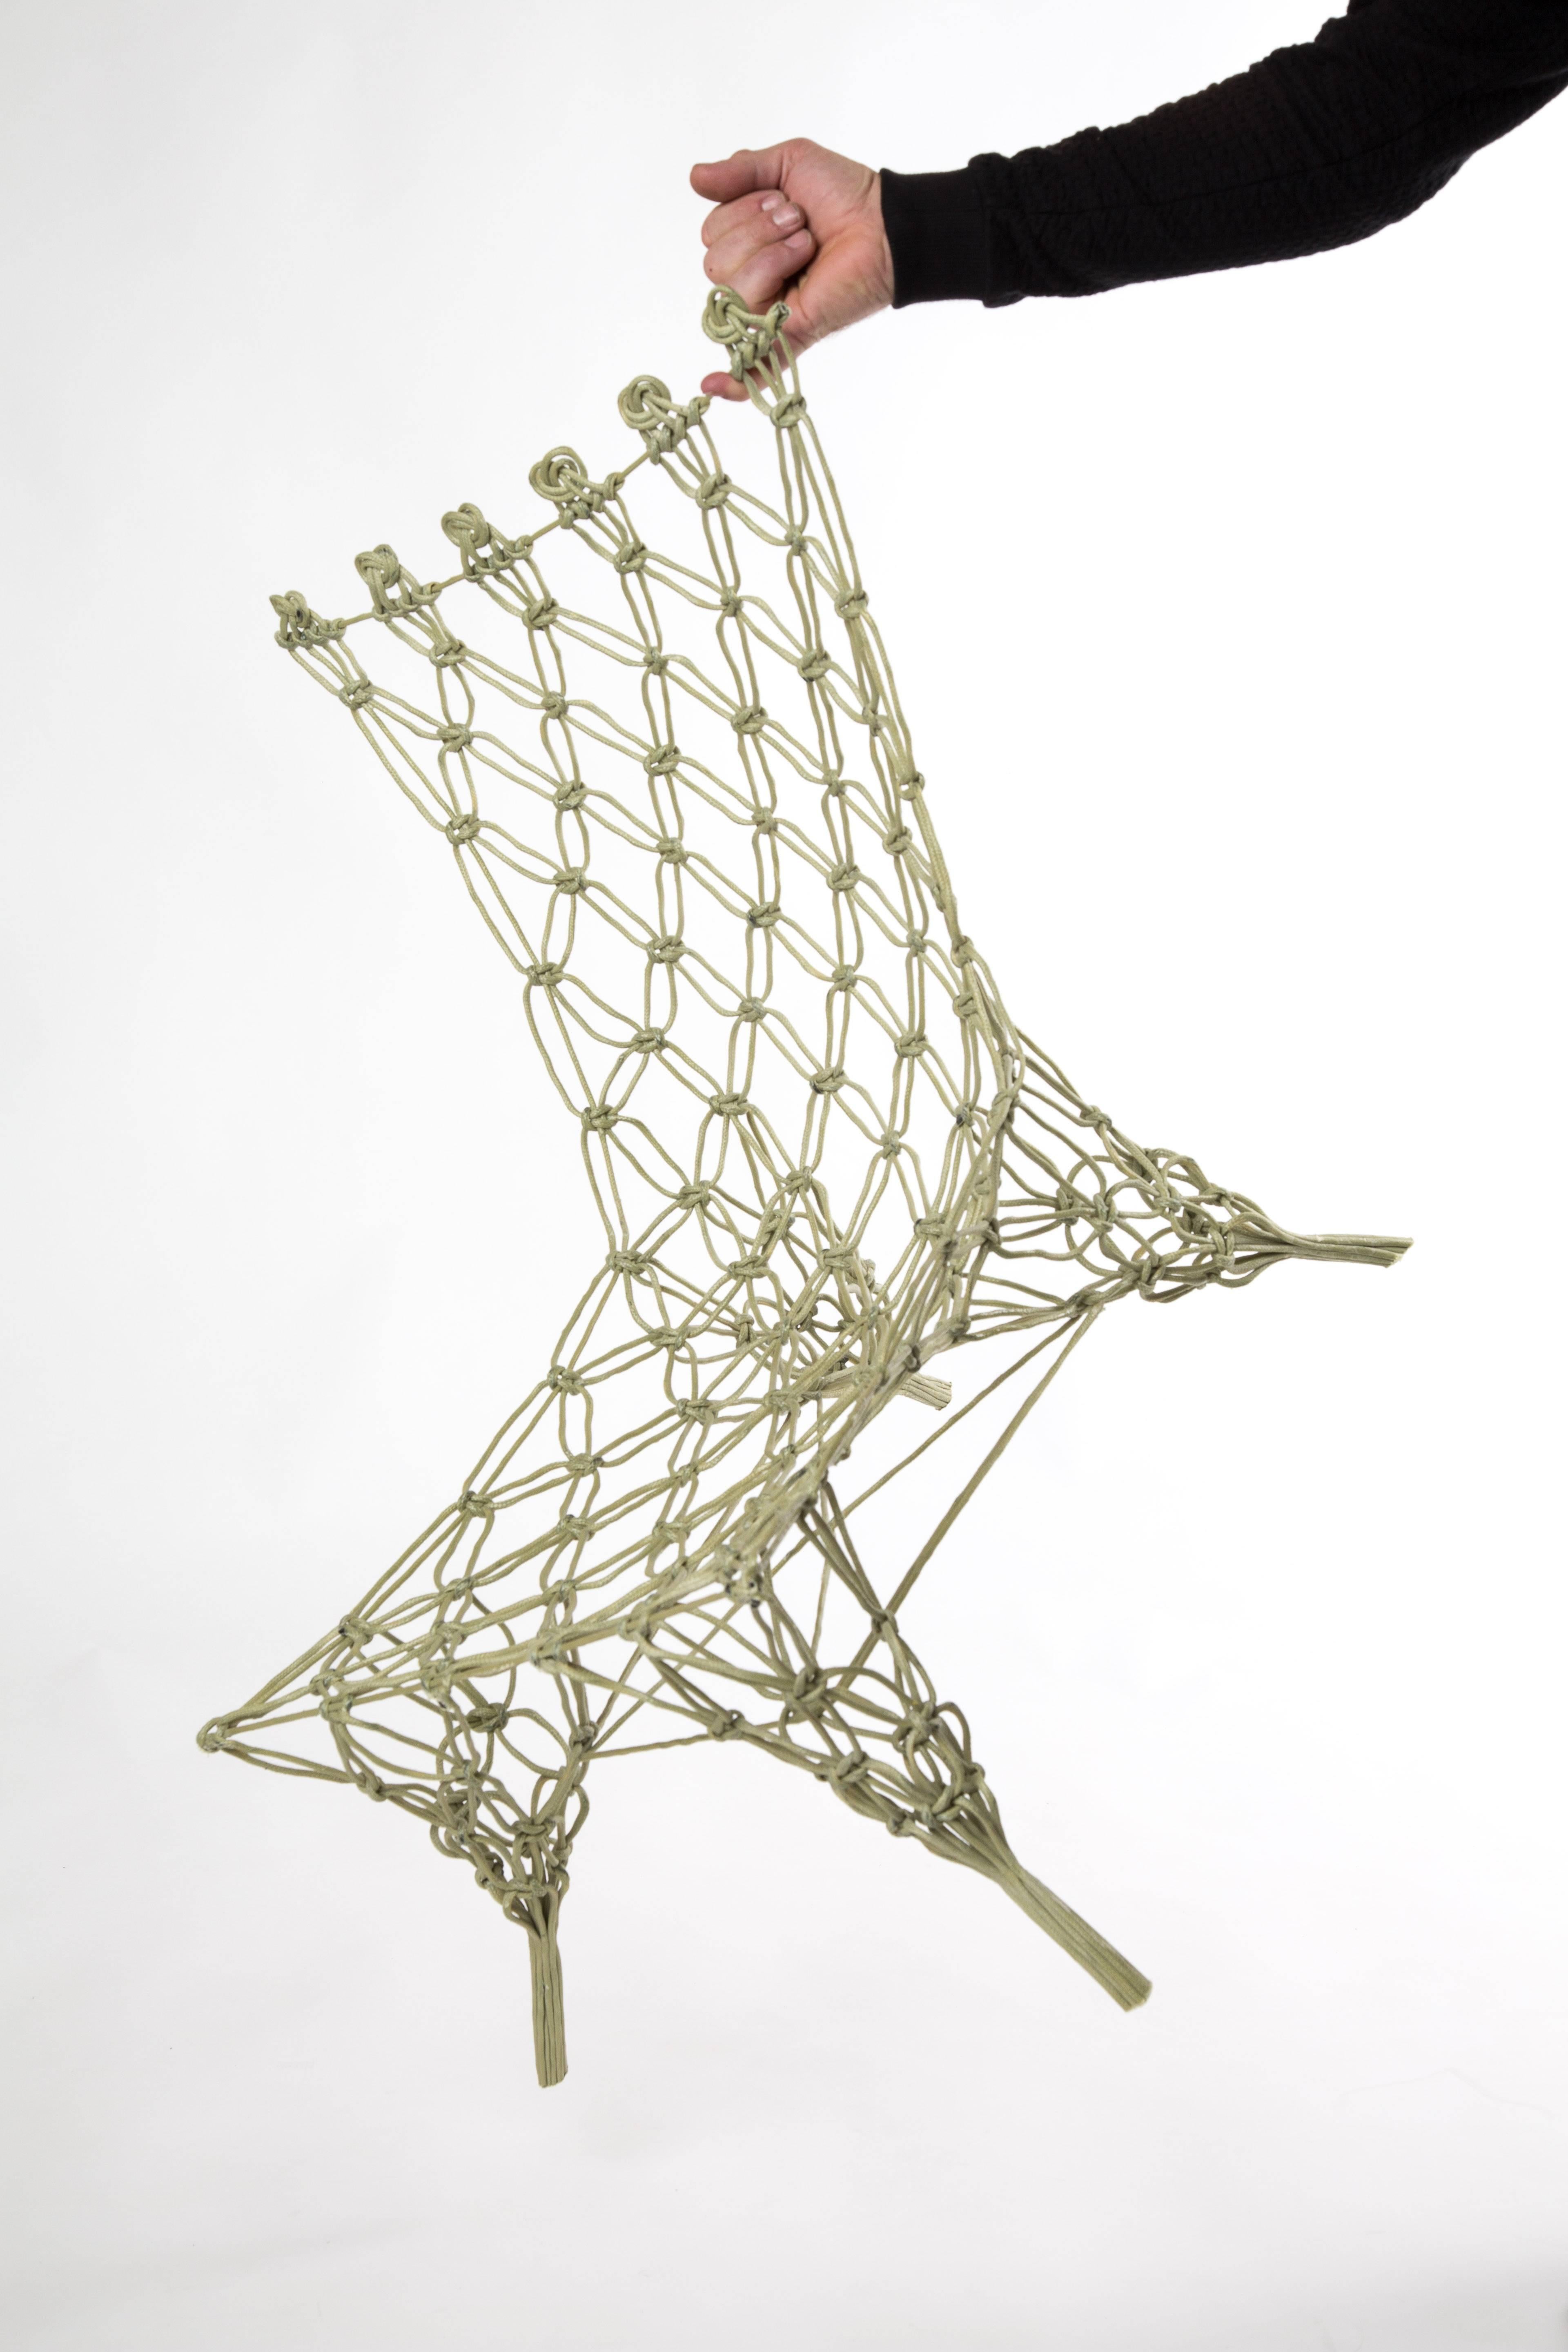 Post-Modern Knotted Chair Marcel Wanders for Droog Design, the Netherlands